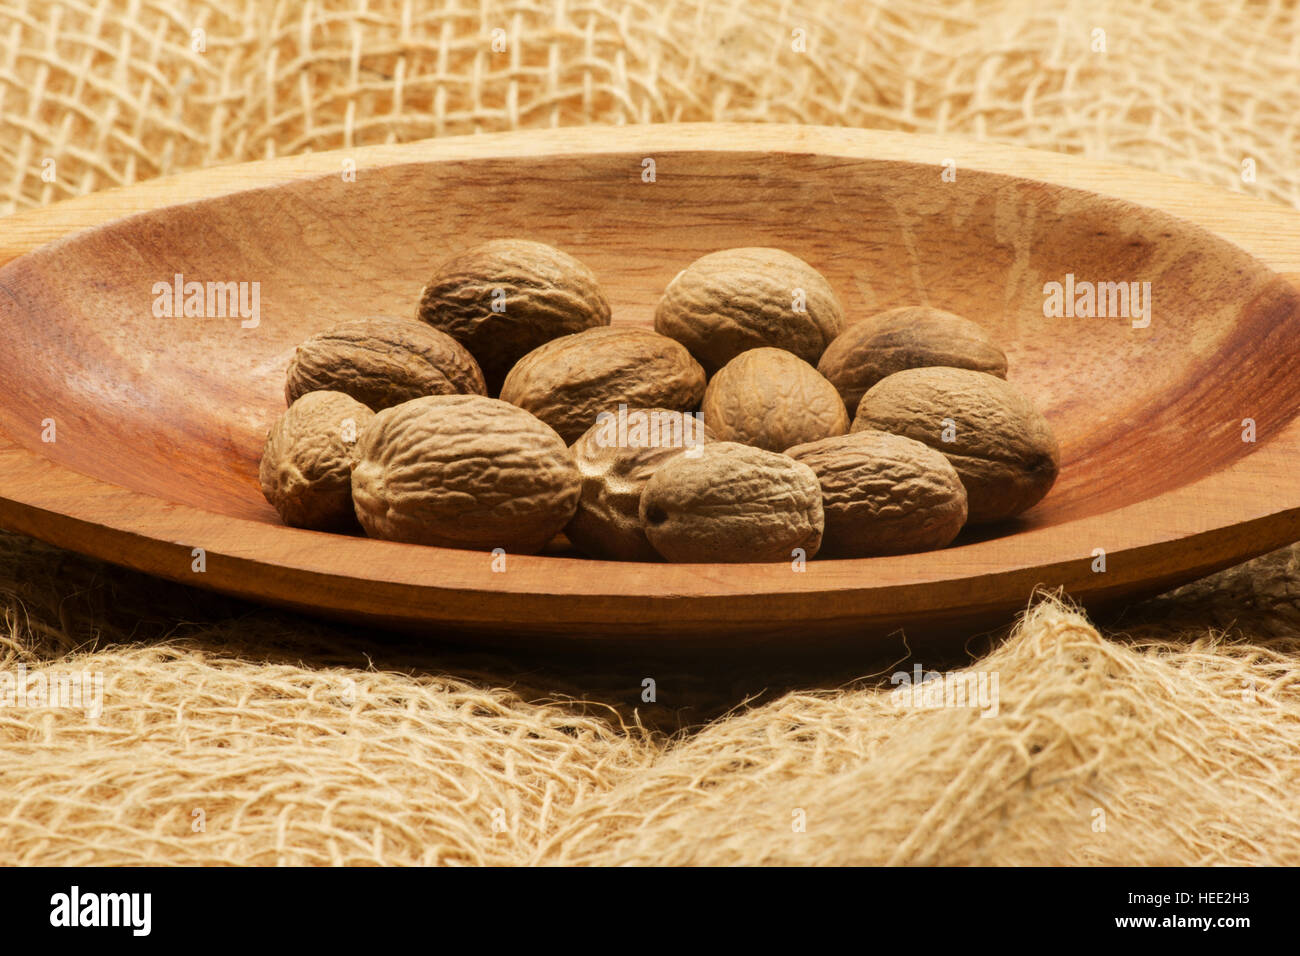 Nutmegs (Myristica fragrans) in a wooden bowl on burlap Stock Photo